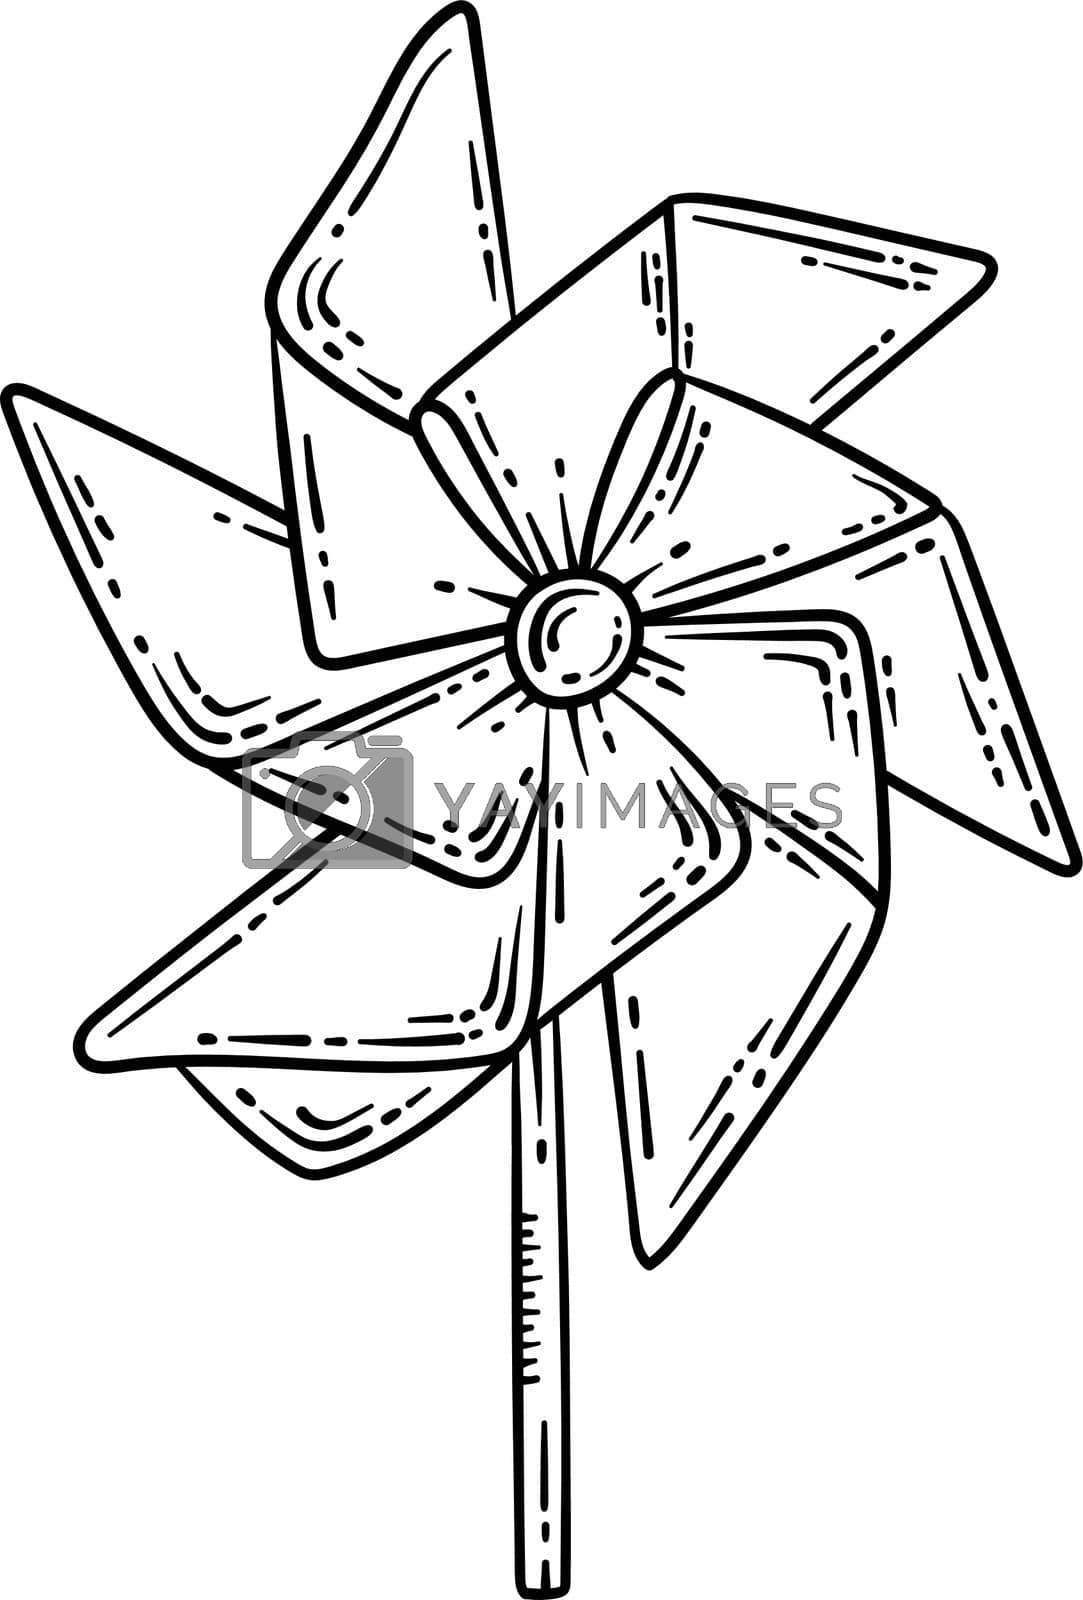 Royalty free image of Paper Windmill Spring Coloring Page for Adults by abbydesign